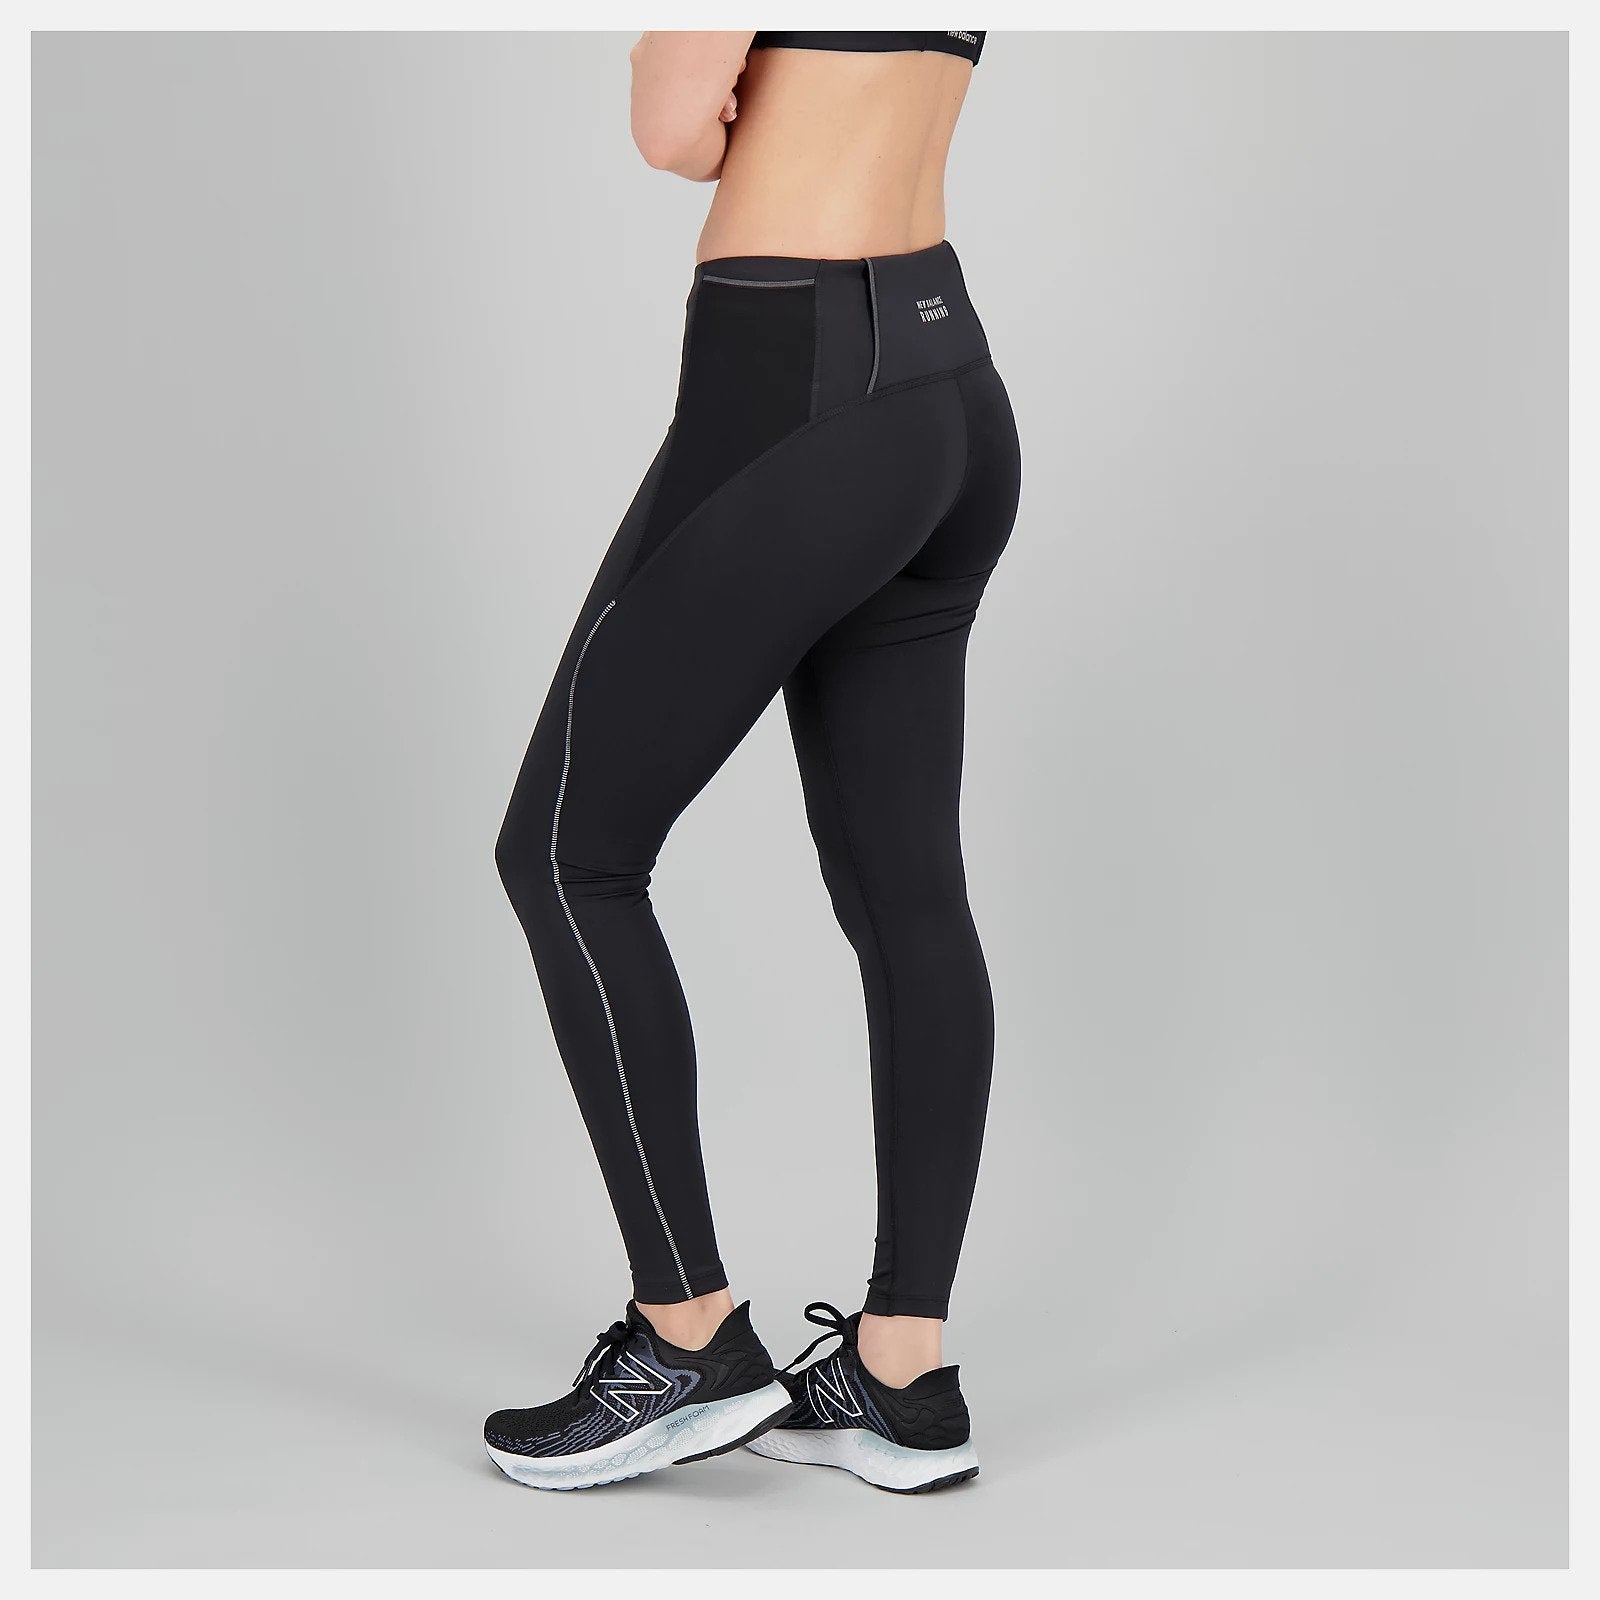 Stay focused on your run with the Impact Run Tight. These women's workout leggings include drop-in hip pockets and a zippered back pocket to store your nutrition, phone, keys and more. Plus, the handy storage tunnel lets you thread extra layers through for a totally hands-free run. Finished with moisture-wicking NB DRYx technology for comfort.